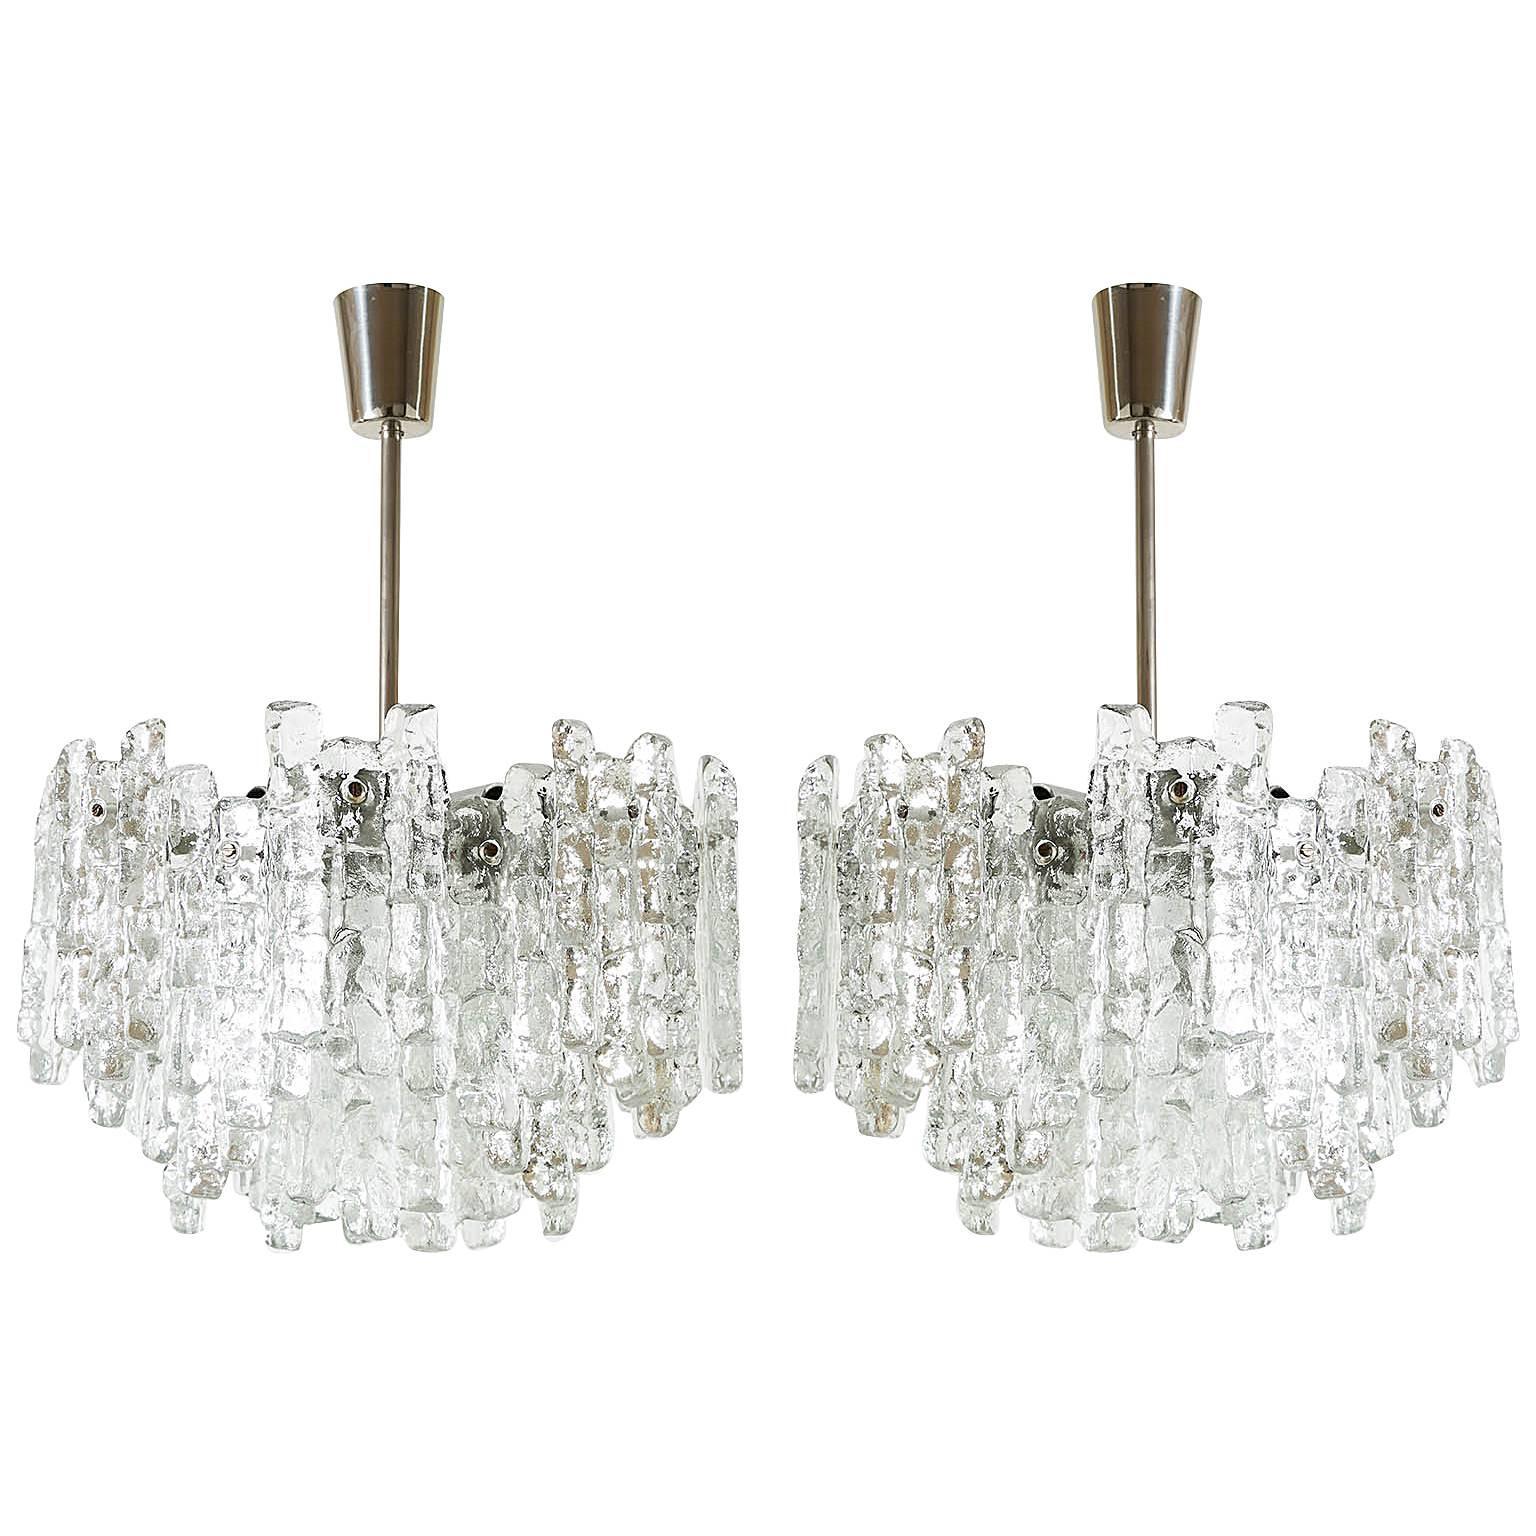 One of two beautiful ice glass light fixtures by Kalmar, Austria, manufactured in midcentury, circa 1970 (late 1960s or early 1970s). Each chandelier is made of 28 massive ice blocks which are mounted on a silver painted metal frame. Stem and canopy